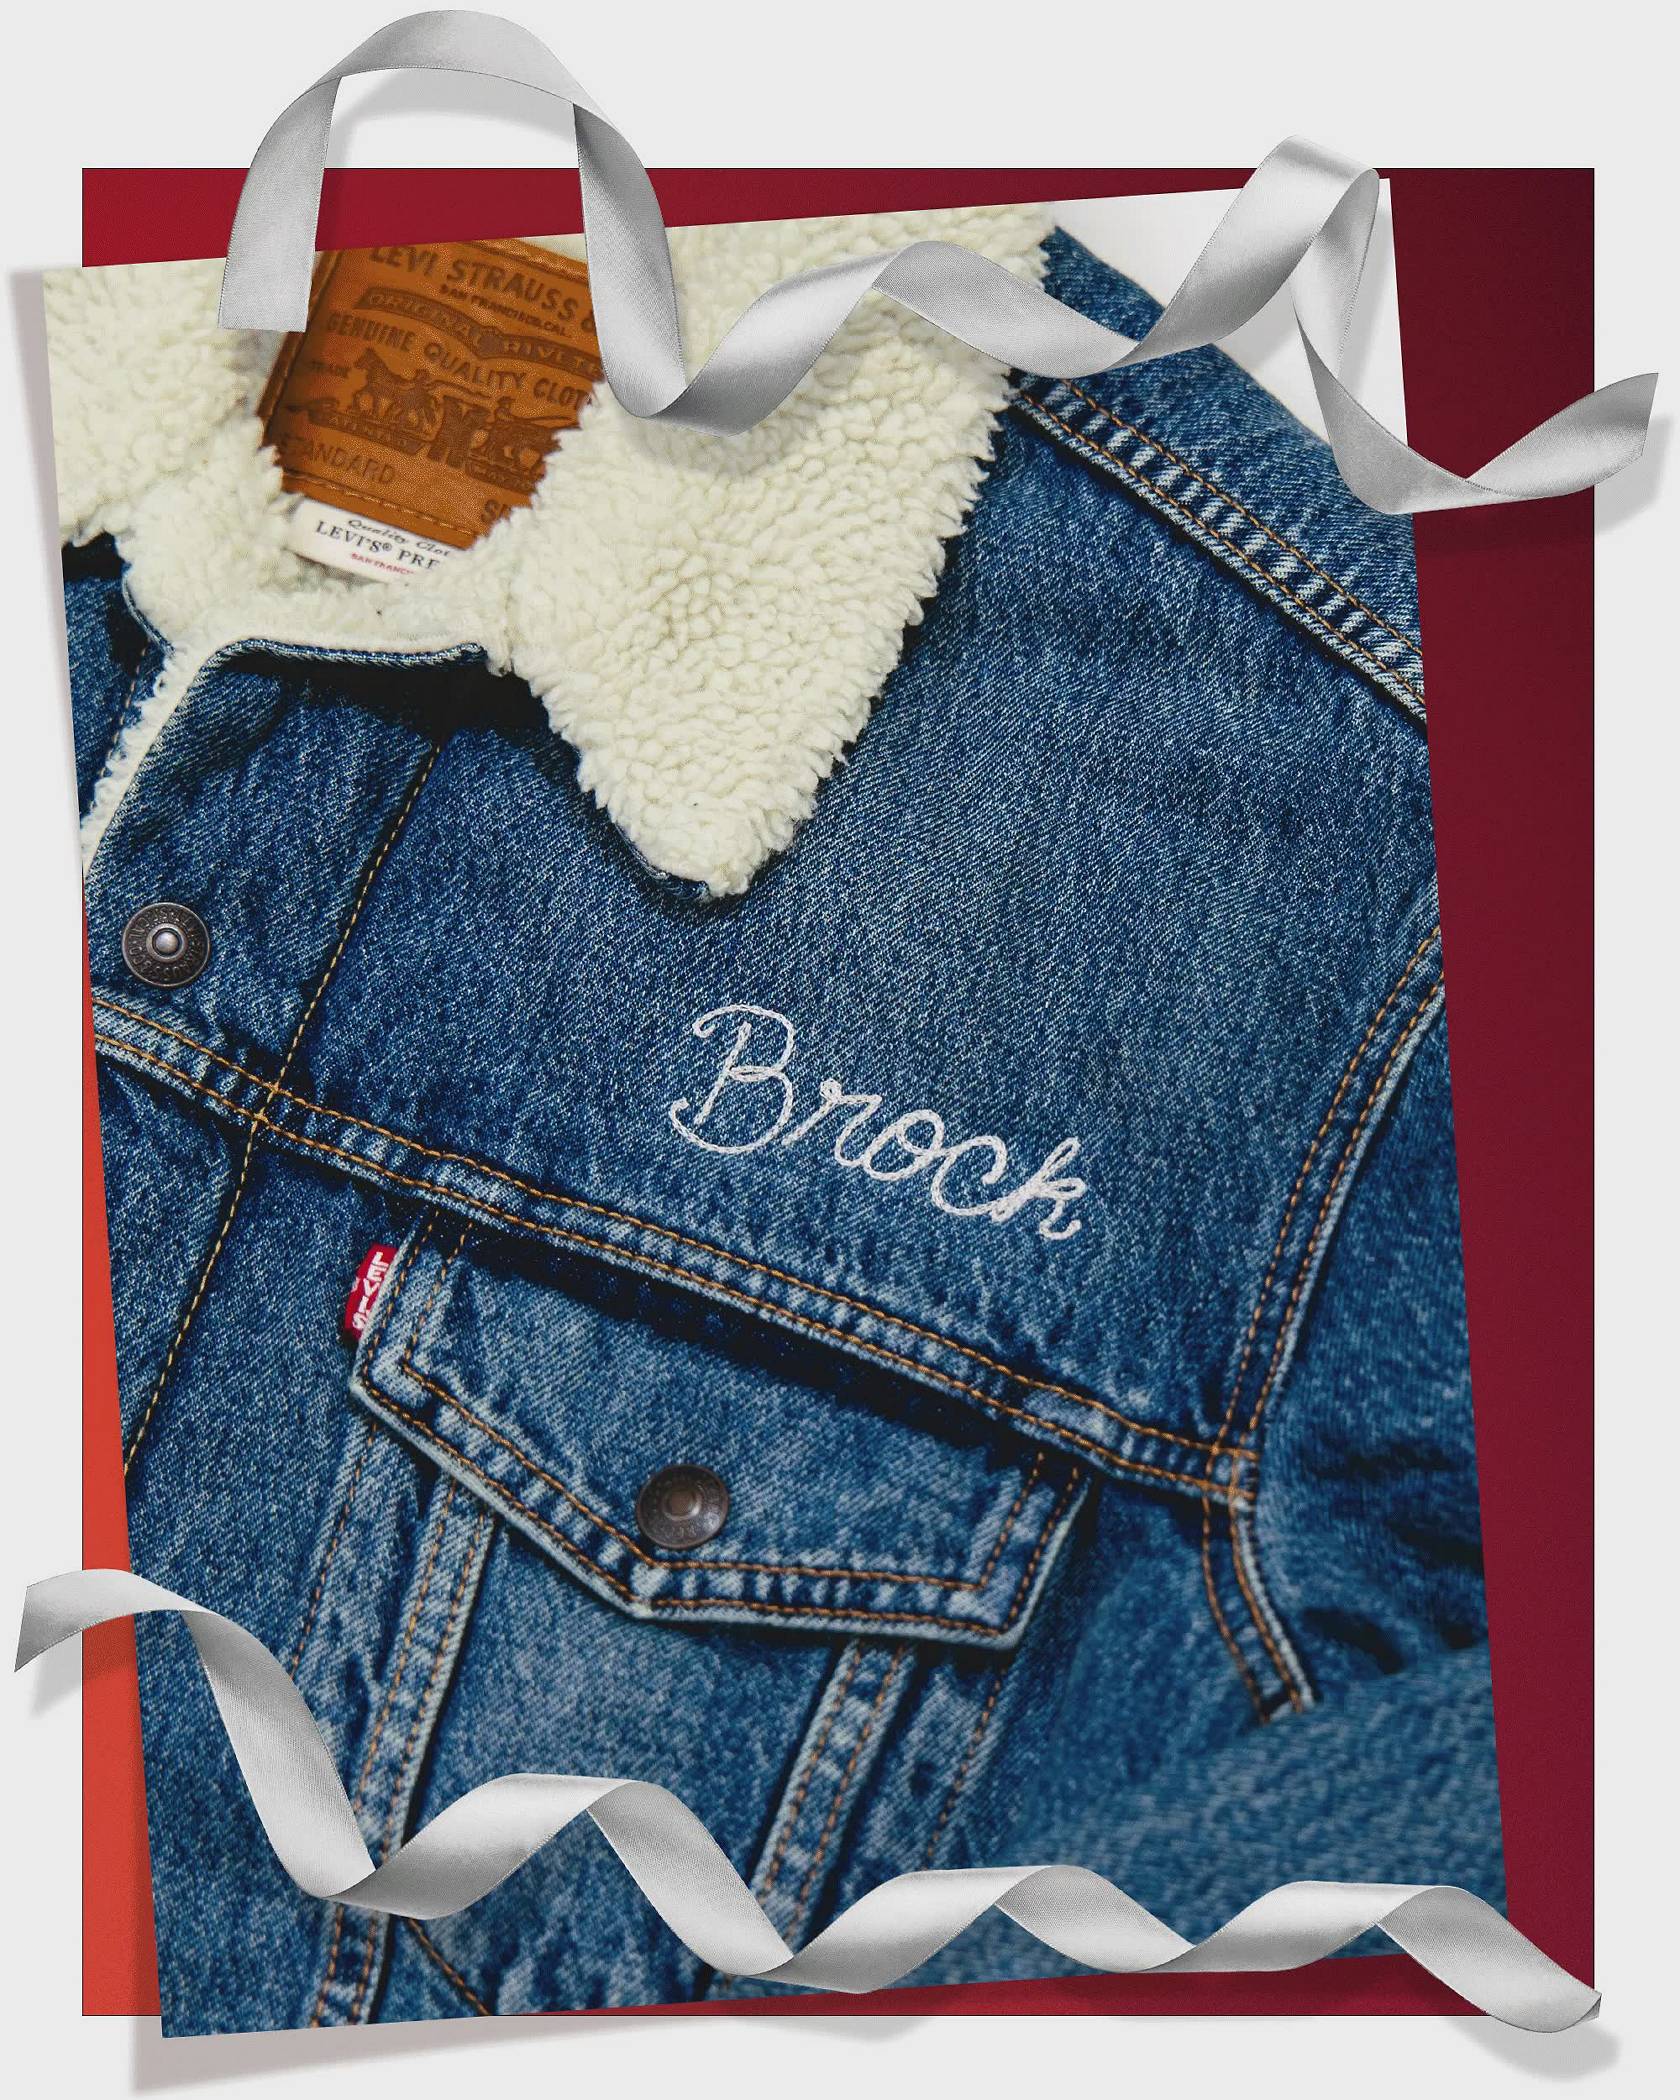 Image of personalized Levi's products.